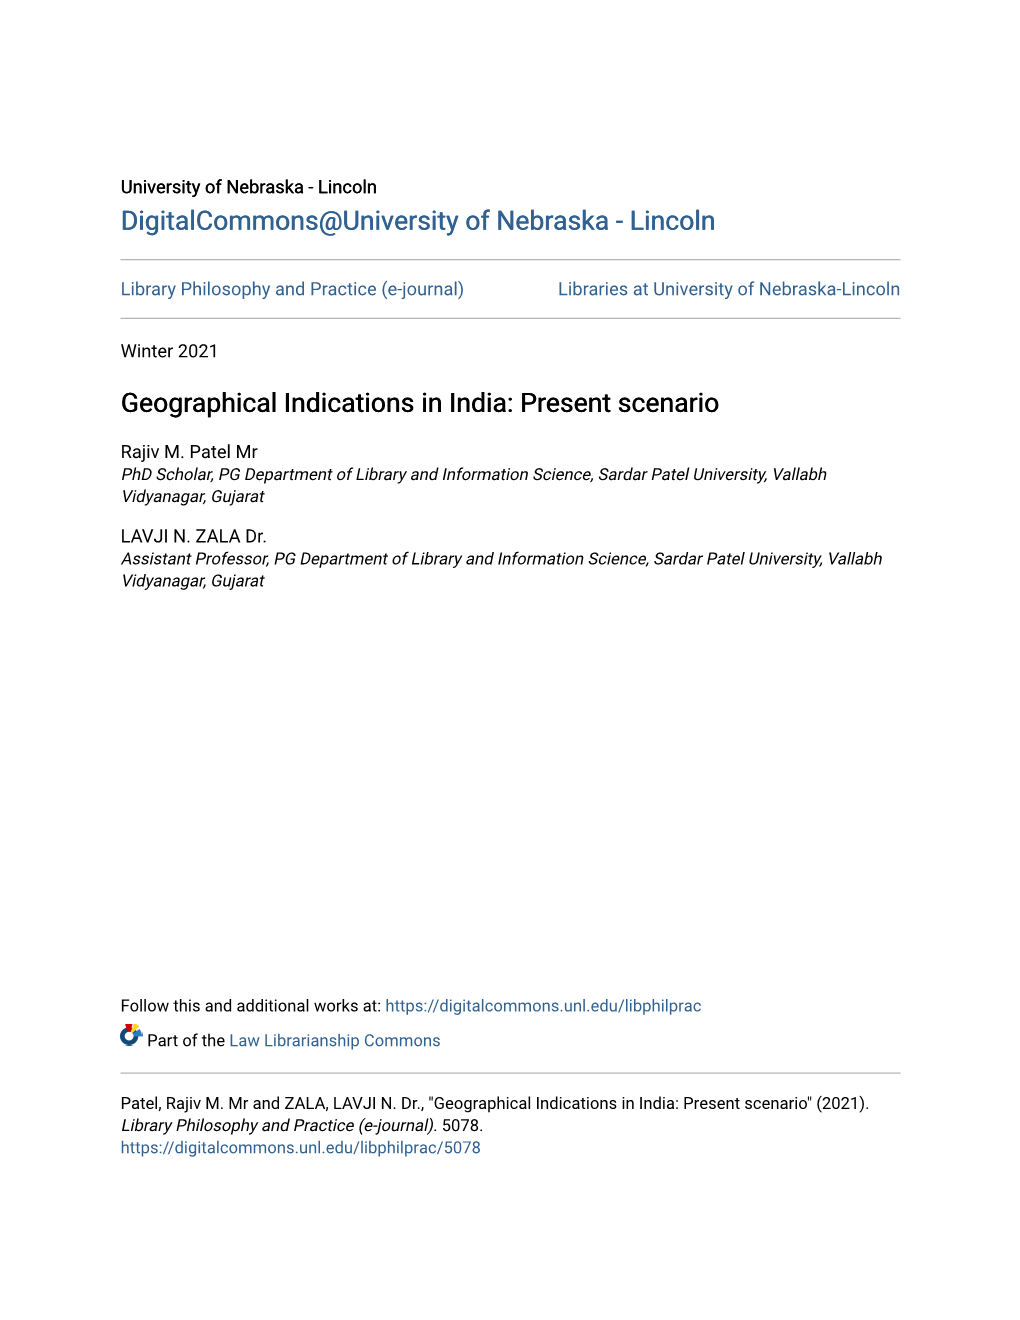 Geographical Indications in India: Present Scenario